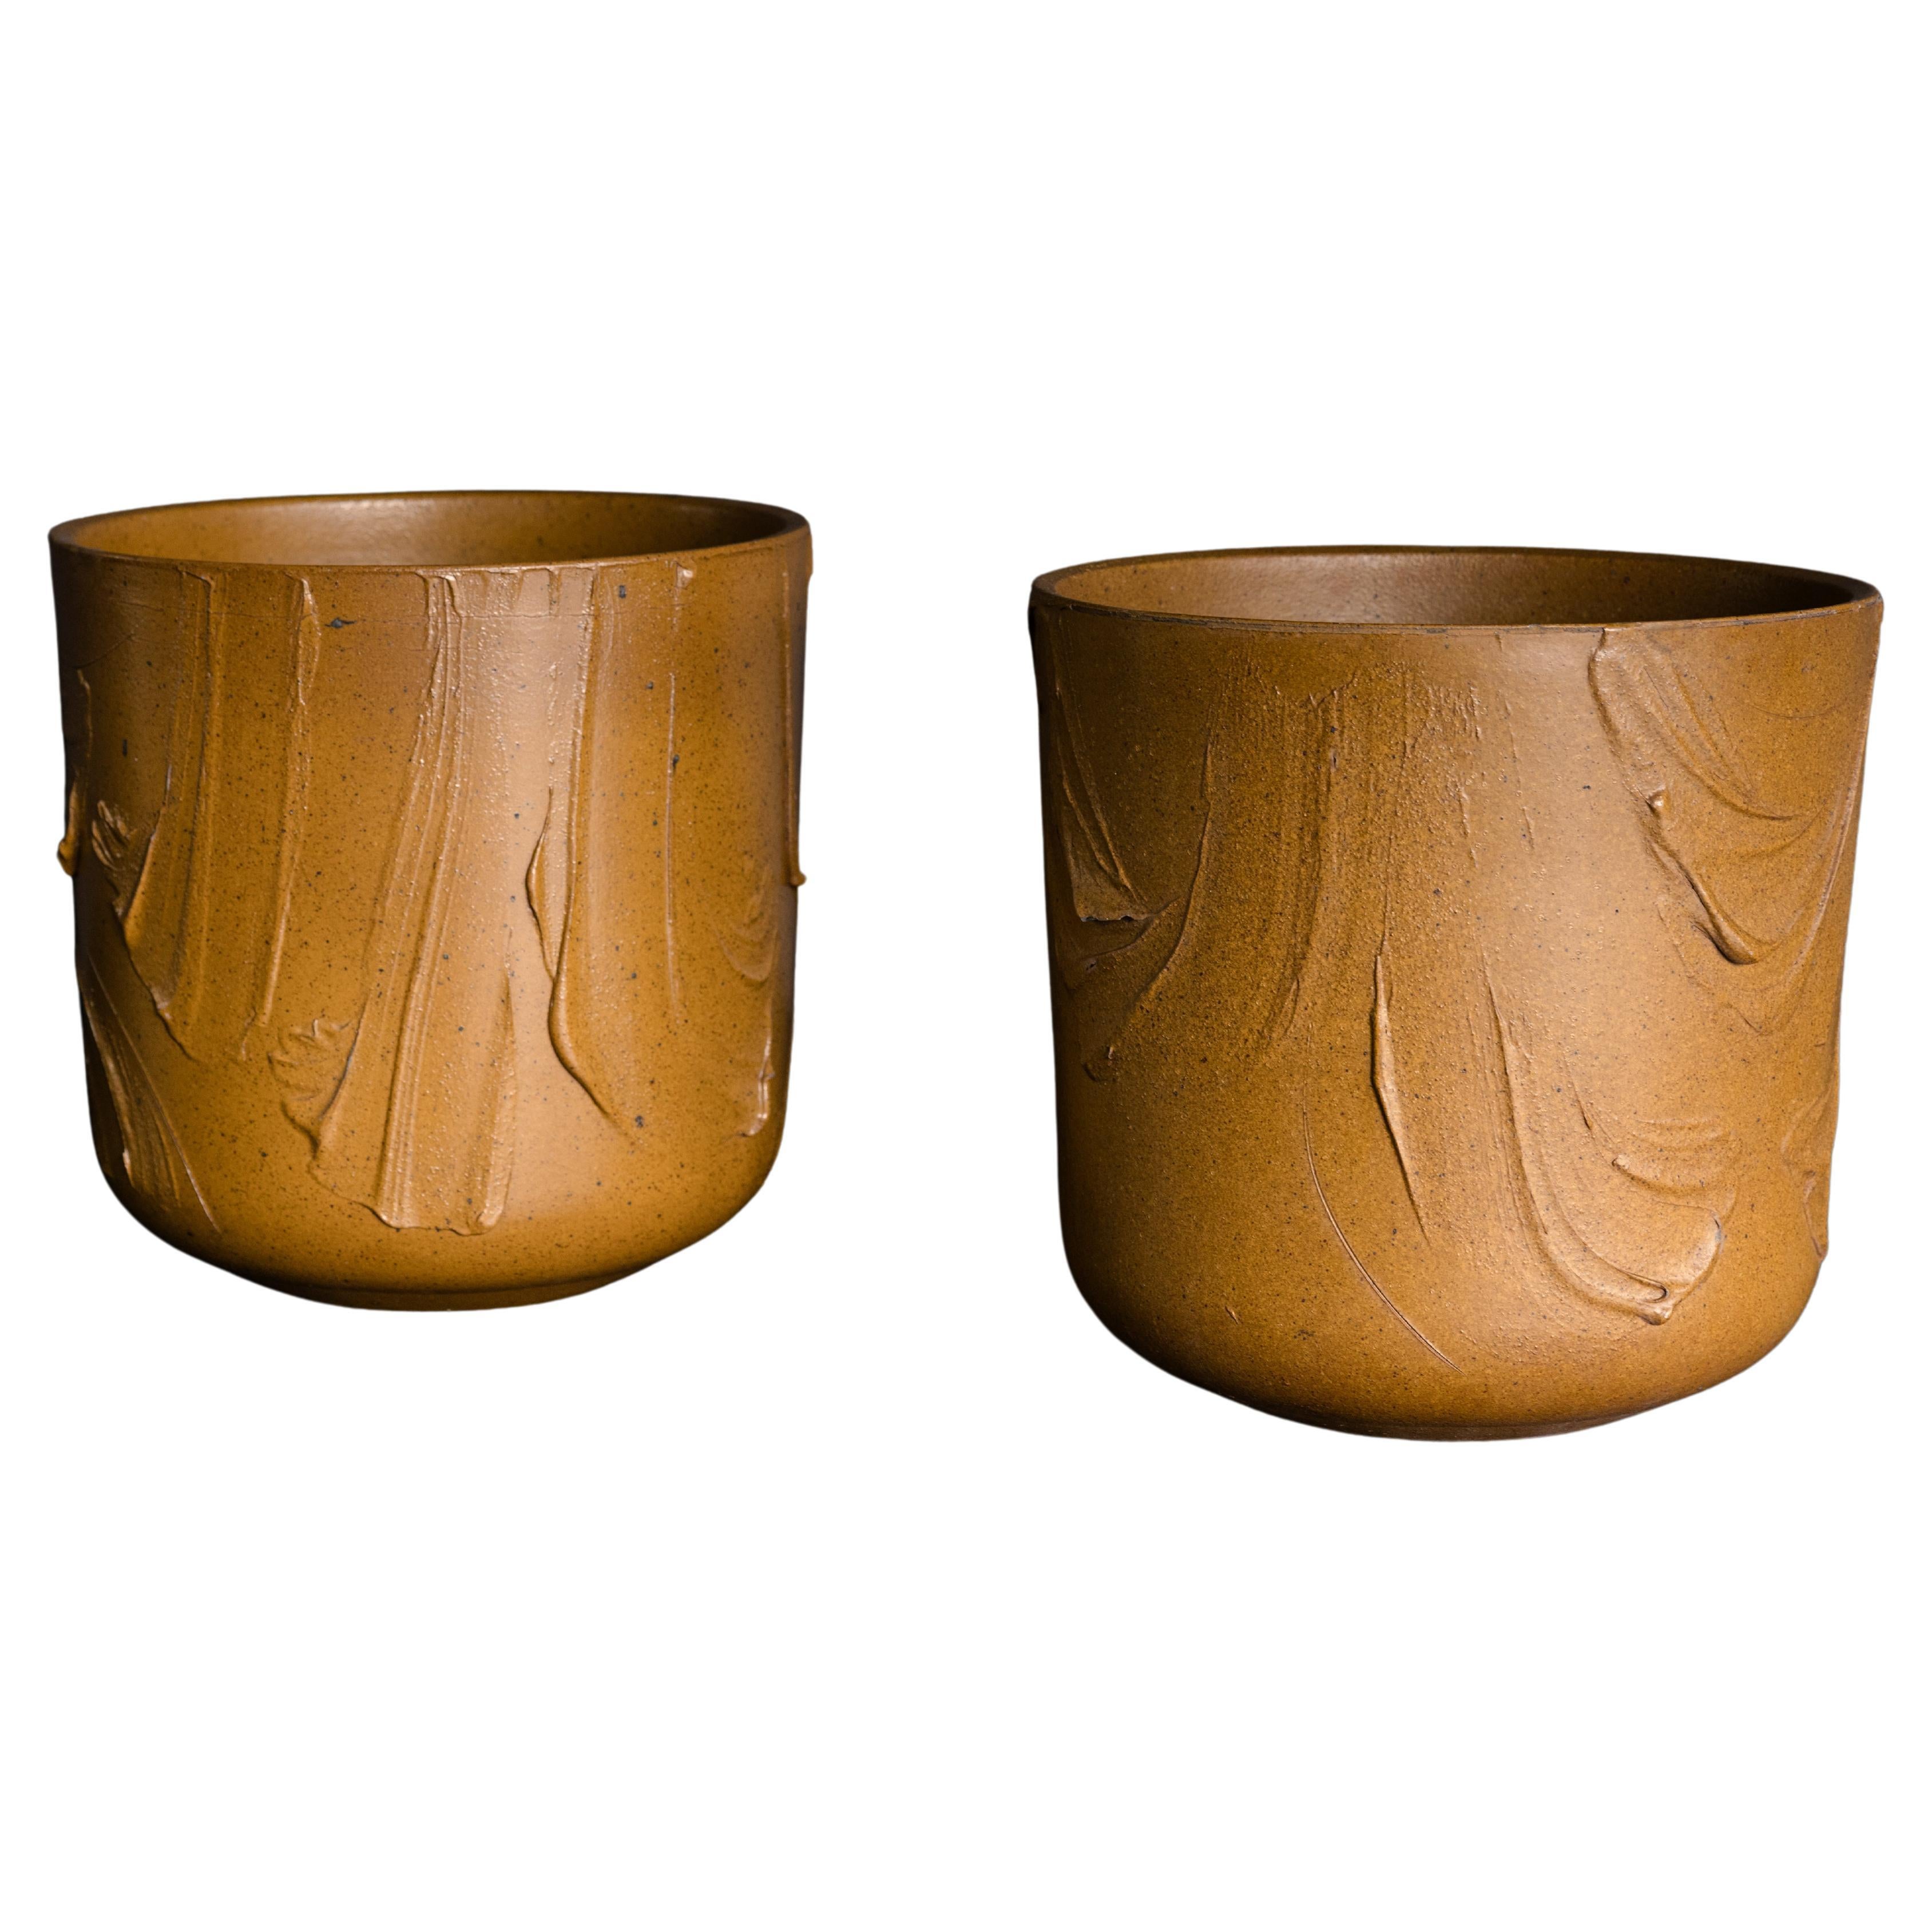 Model 4105 "Expressive" Pro/Artisan Planters by David Cressey for AP For Sale